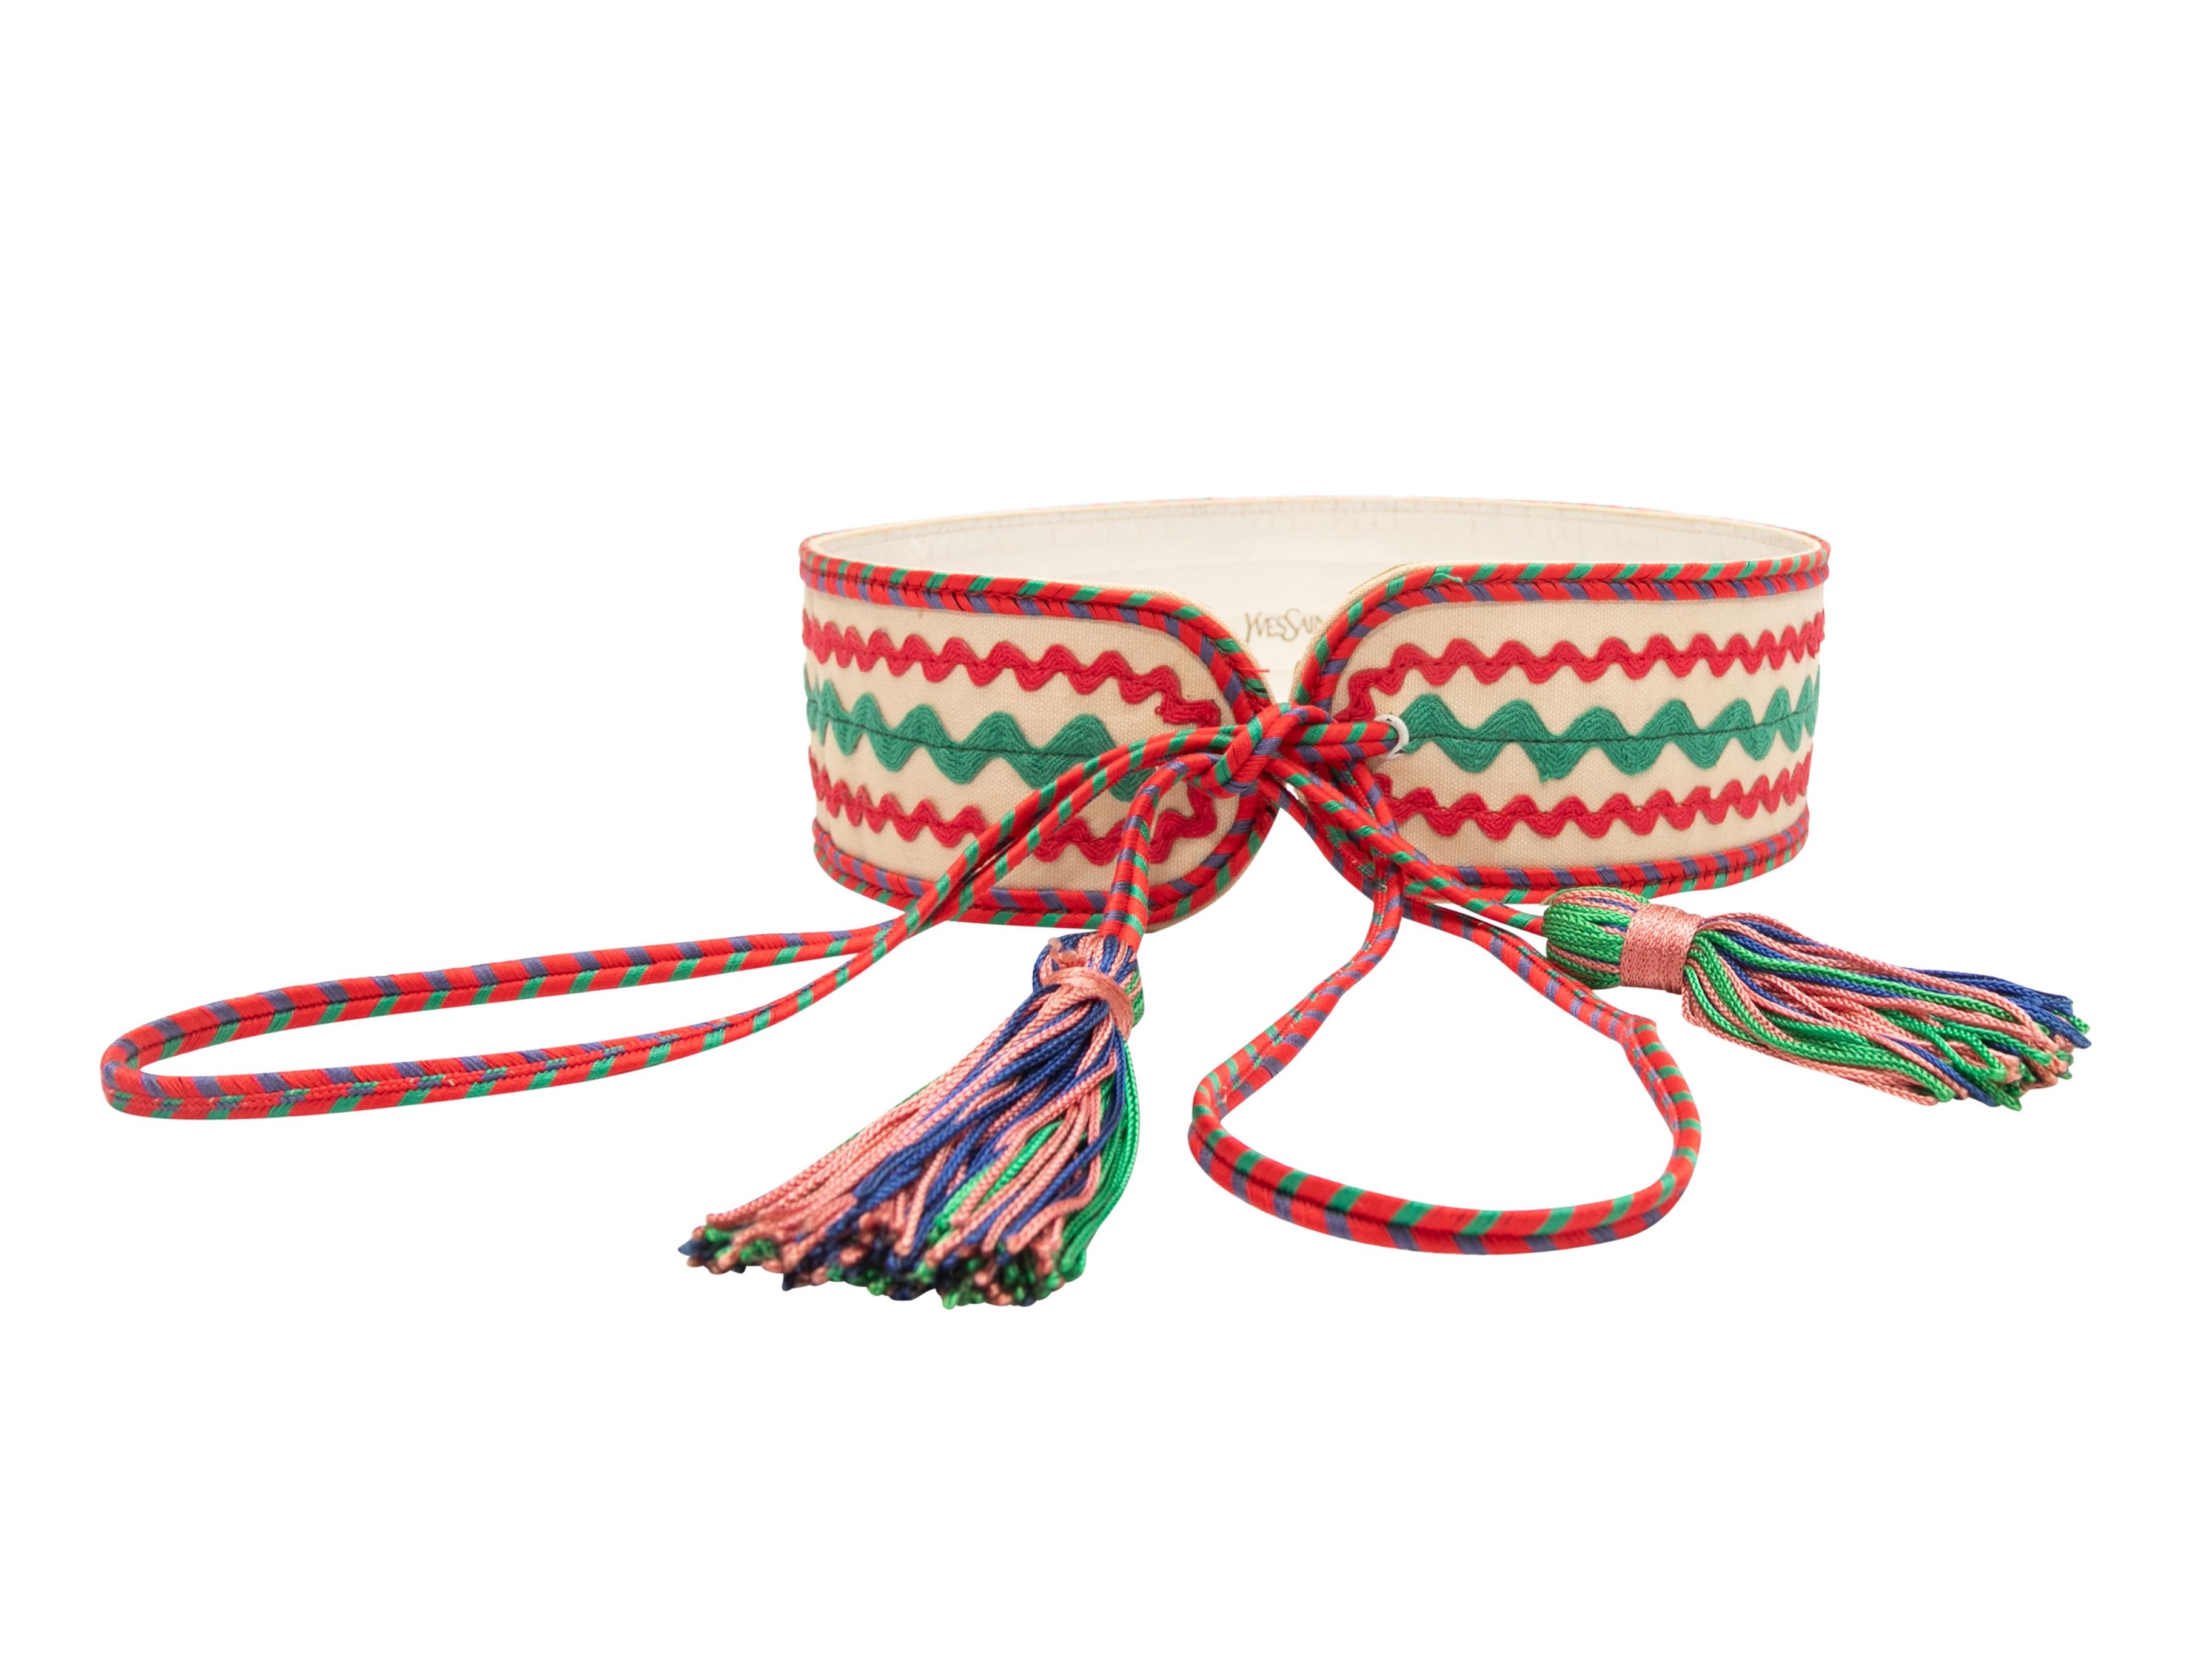 Vintage white and multicolor ric-rac tassel-trimmed belt by Yves Saint Laurent. From the 1976 Russian Collection. 2.5